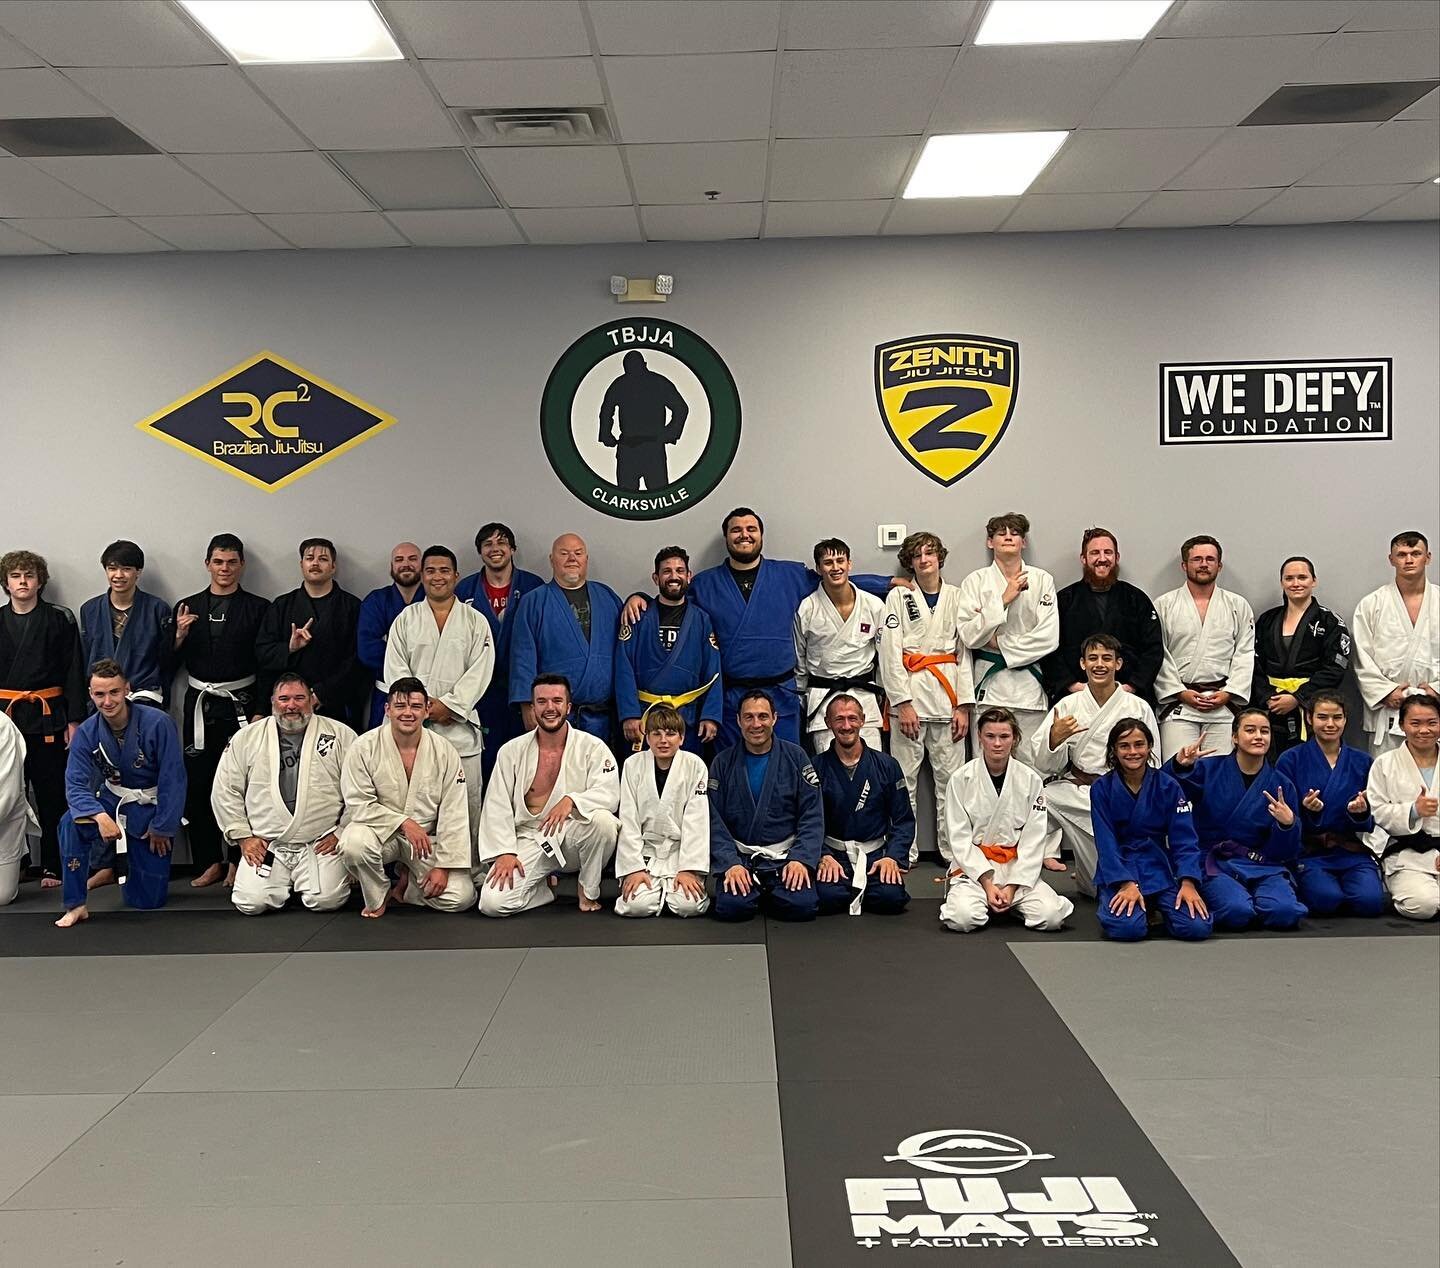 First day of Judo @ our new location w/ @tbjja_clarksville. Come check us out Tuesday and Thursday 6-7pm kids 7-8pm adults. All other class times and info on TBJJAC.com!